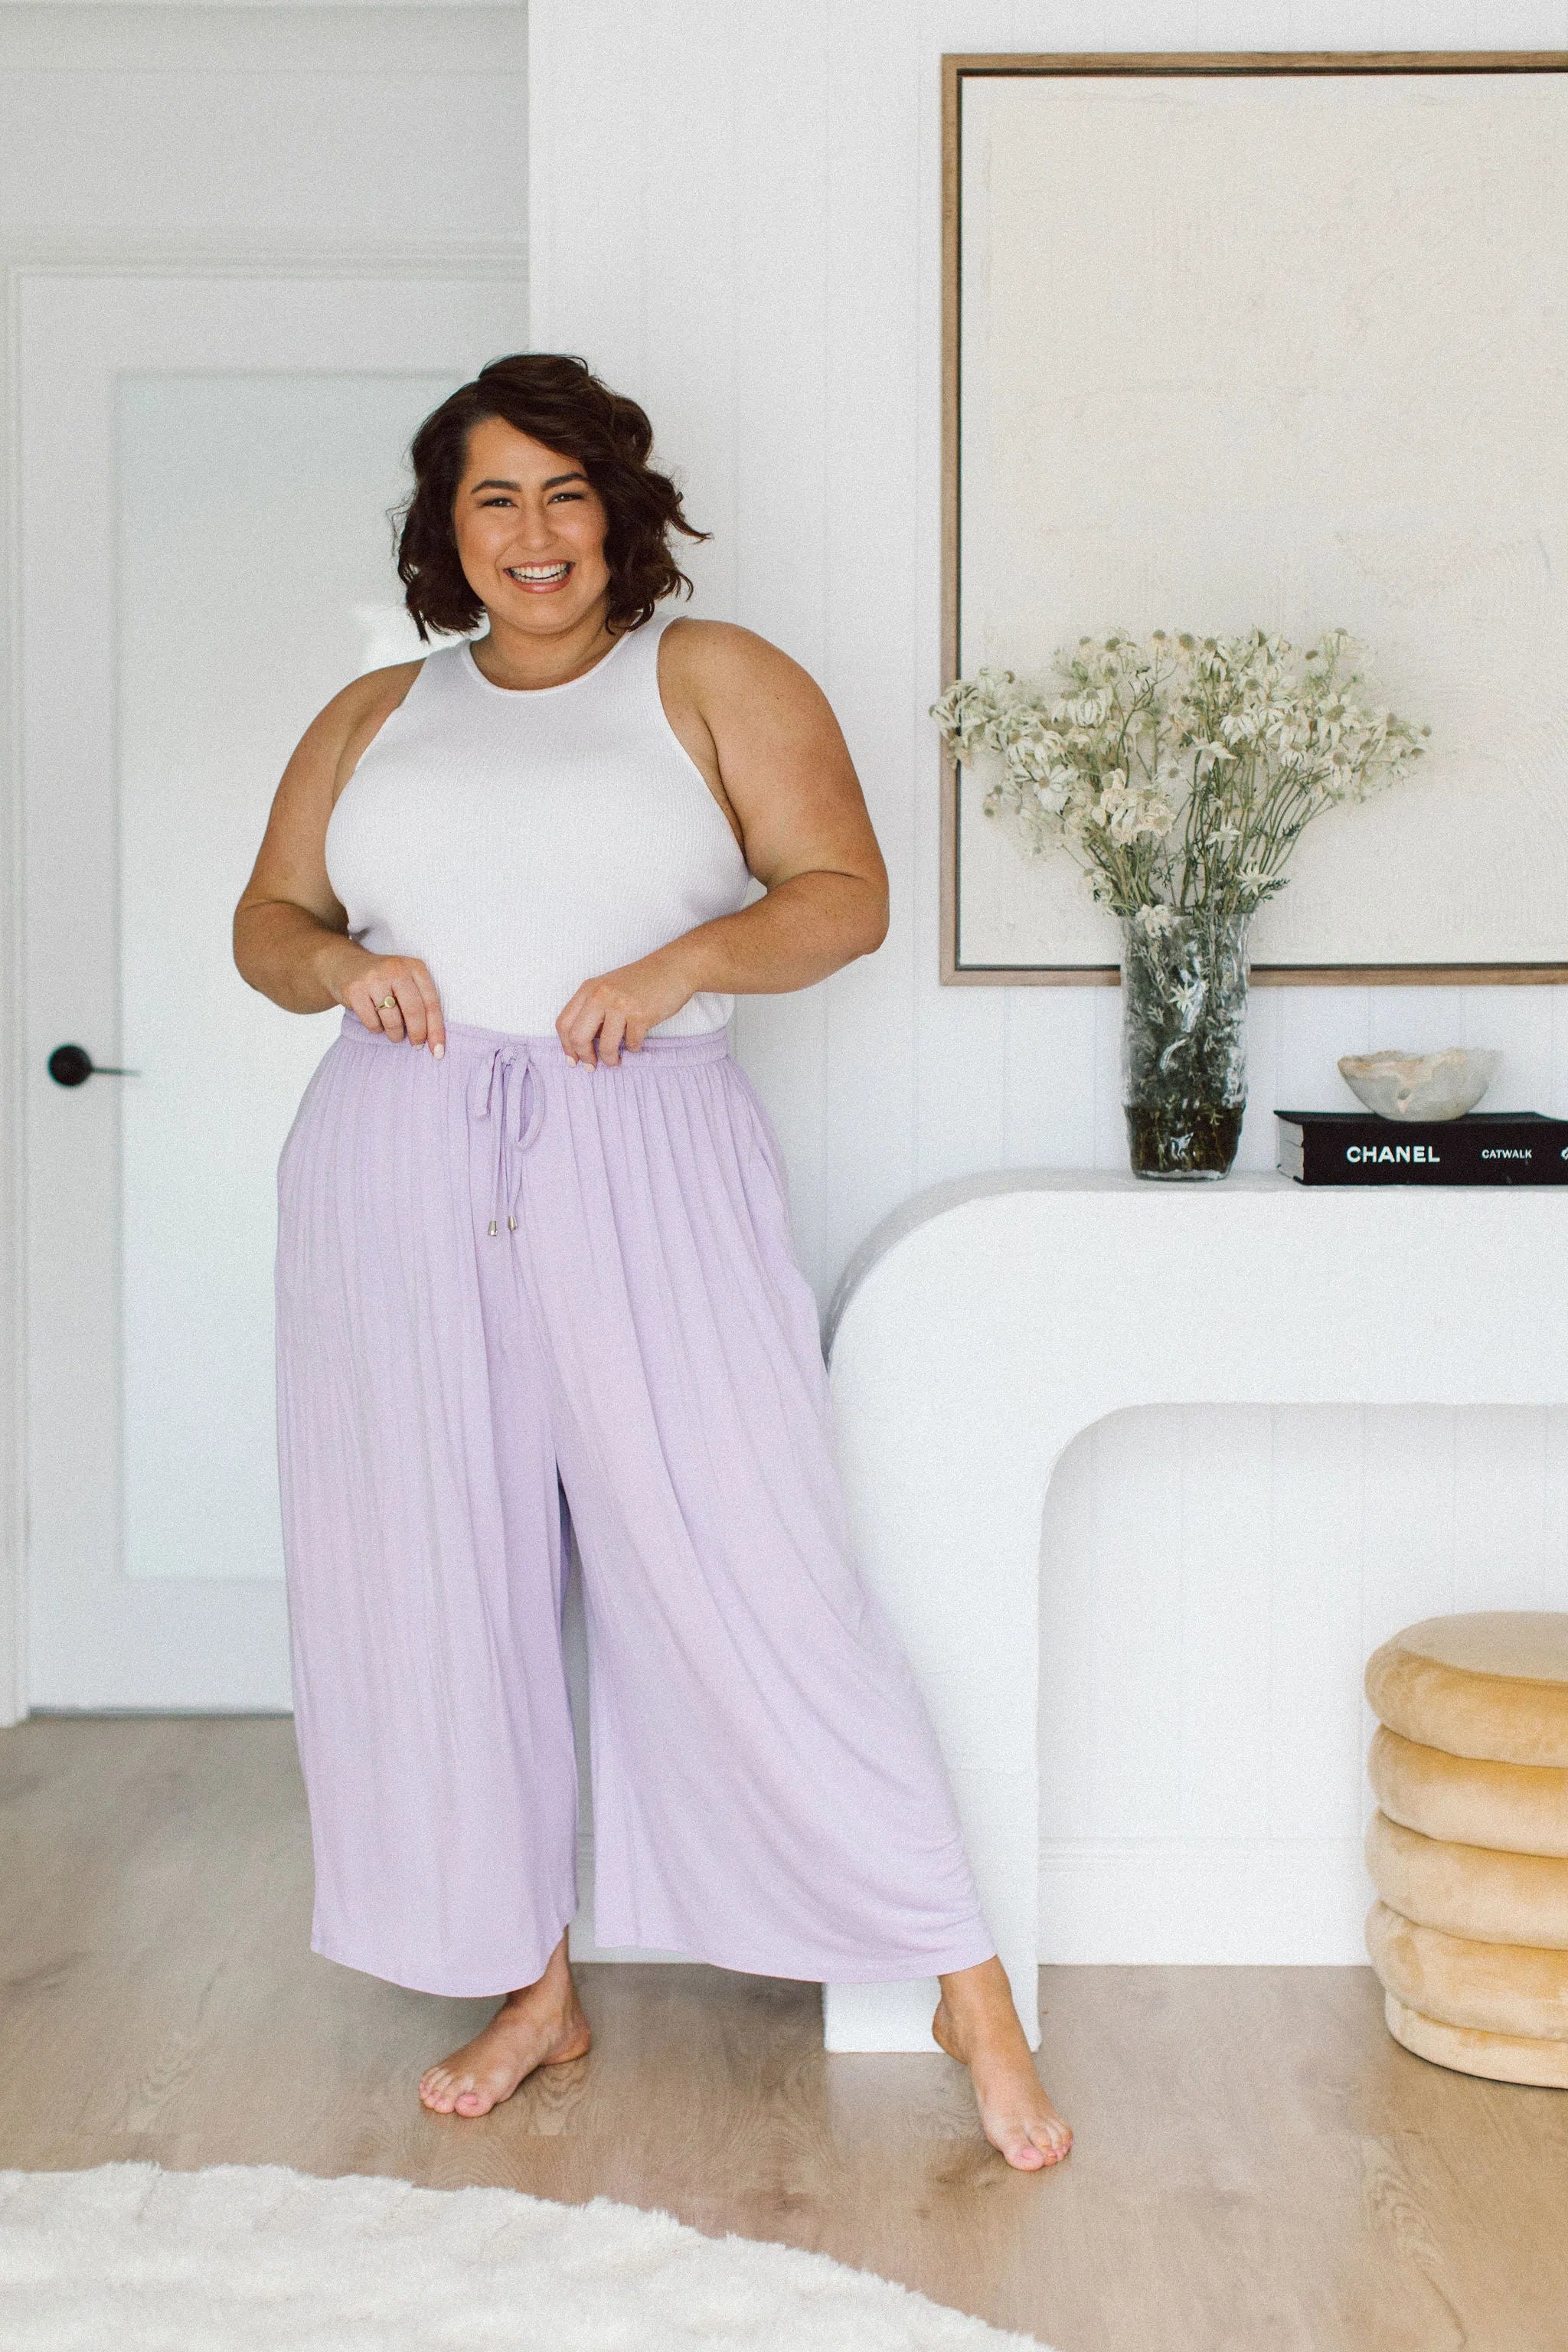 Stylish Lilac Plus Size Pants - Darcy Pants for Women